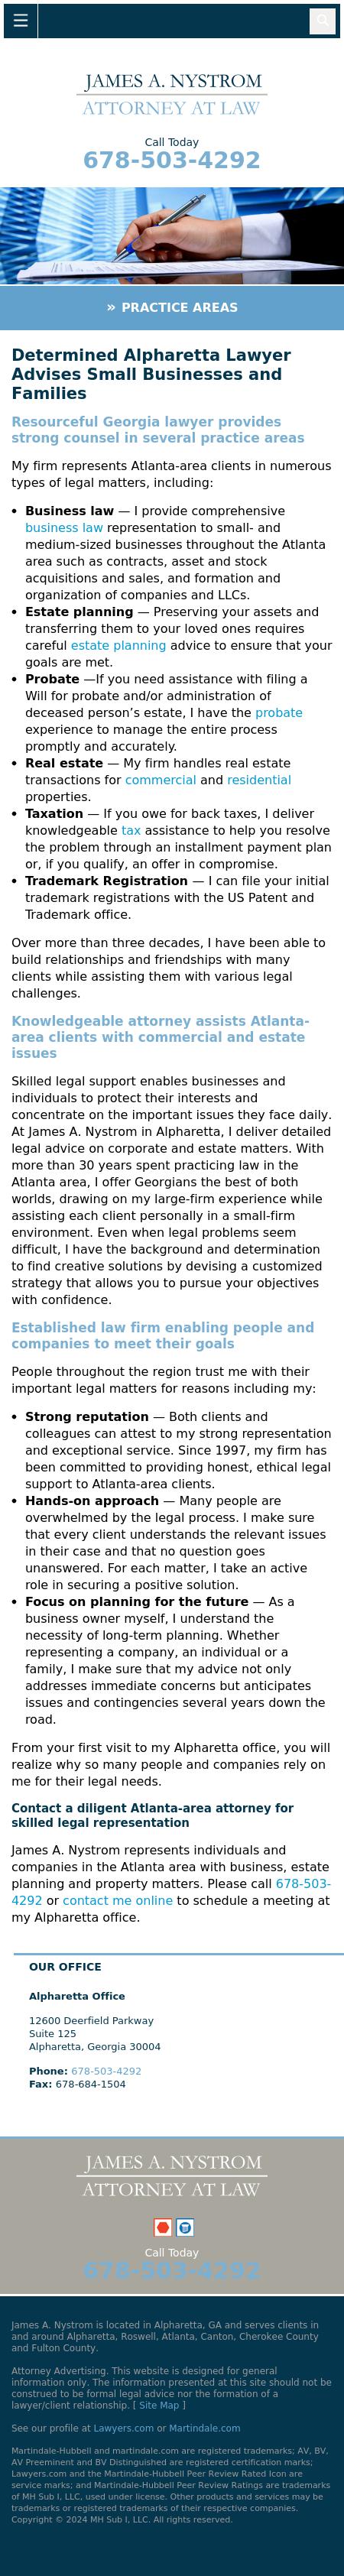 James A. Nystrom, Attorney at Law - Alpharetta GA Lawyers